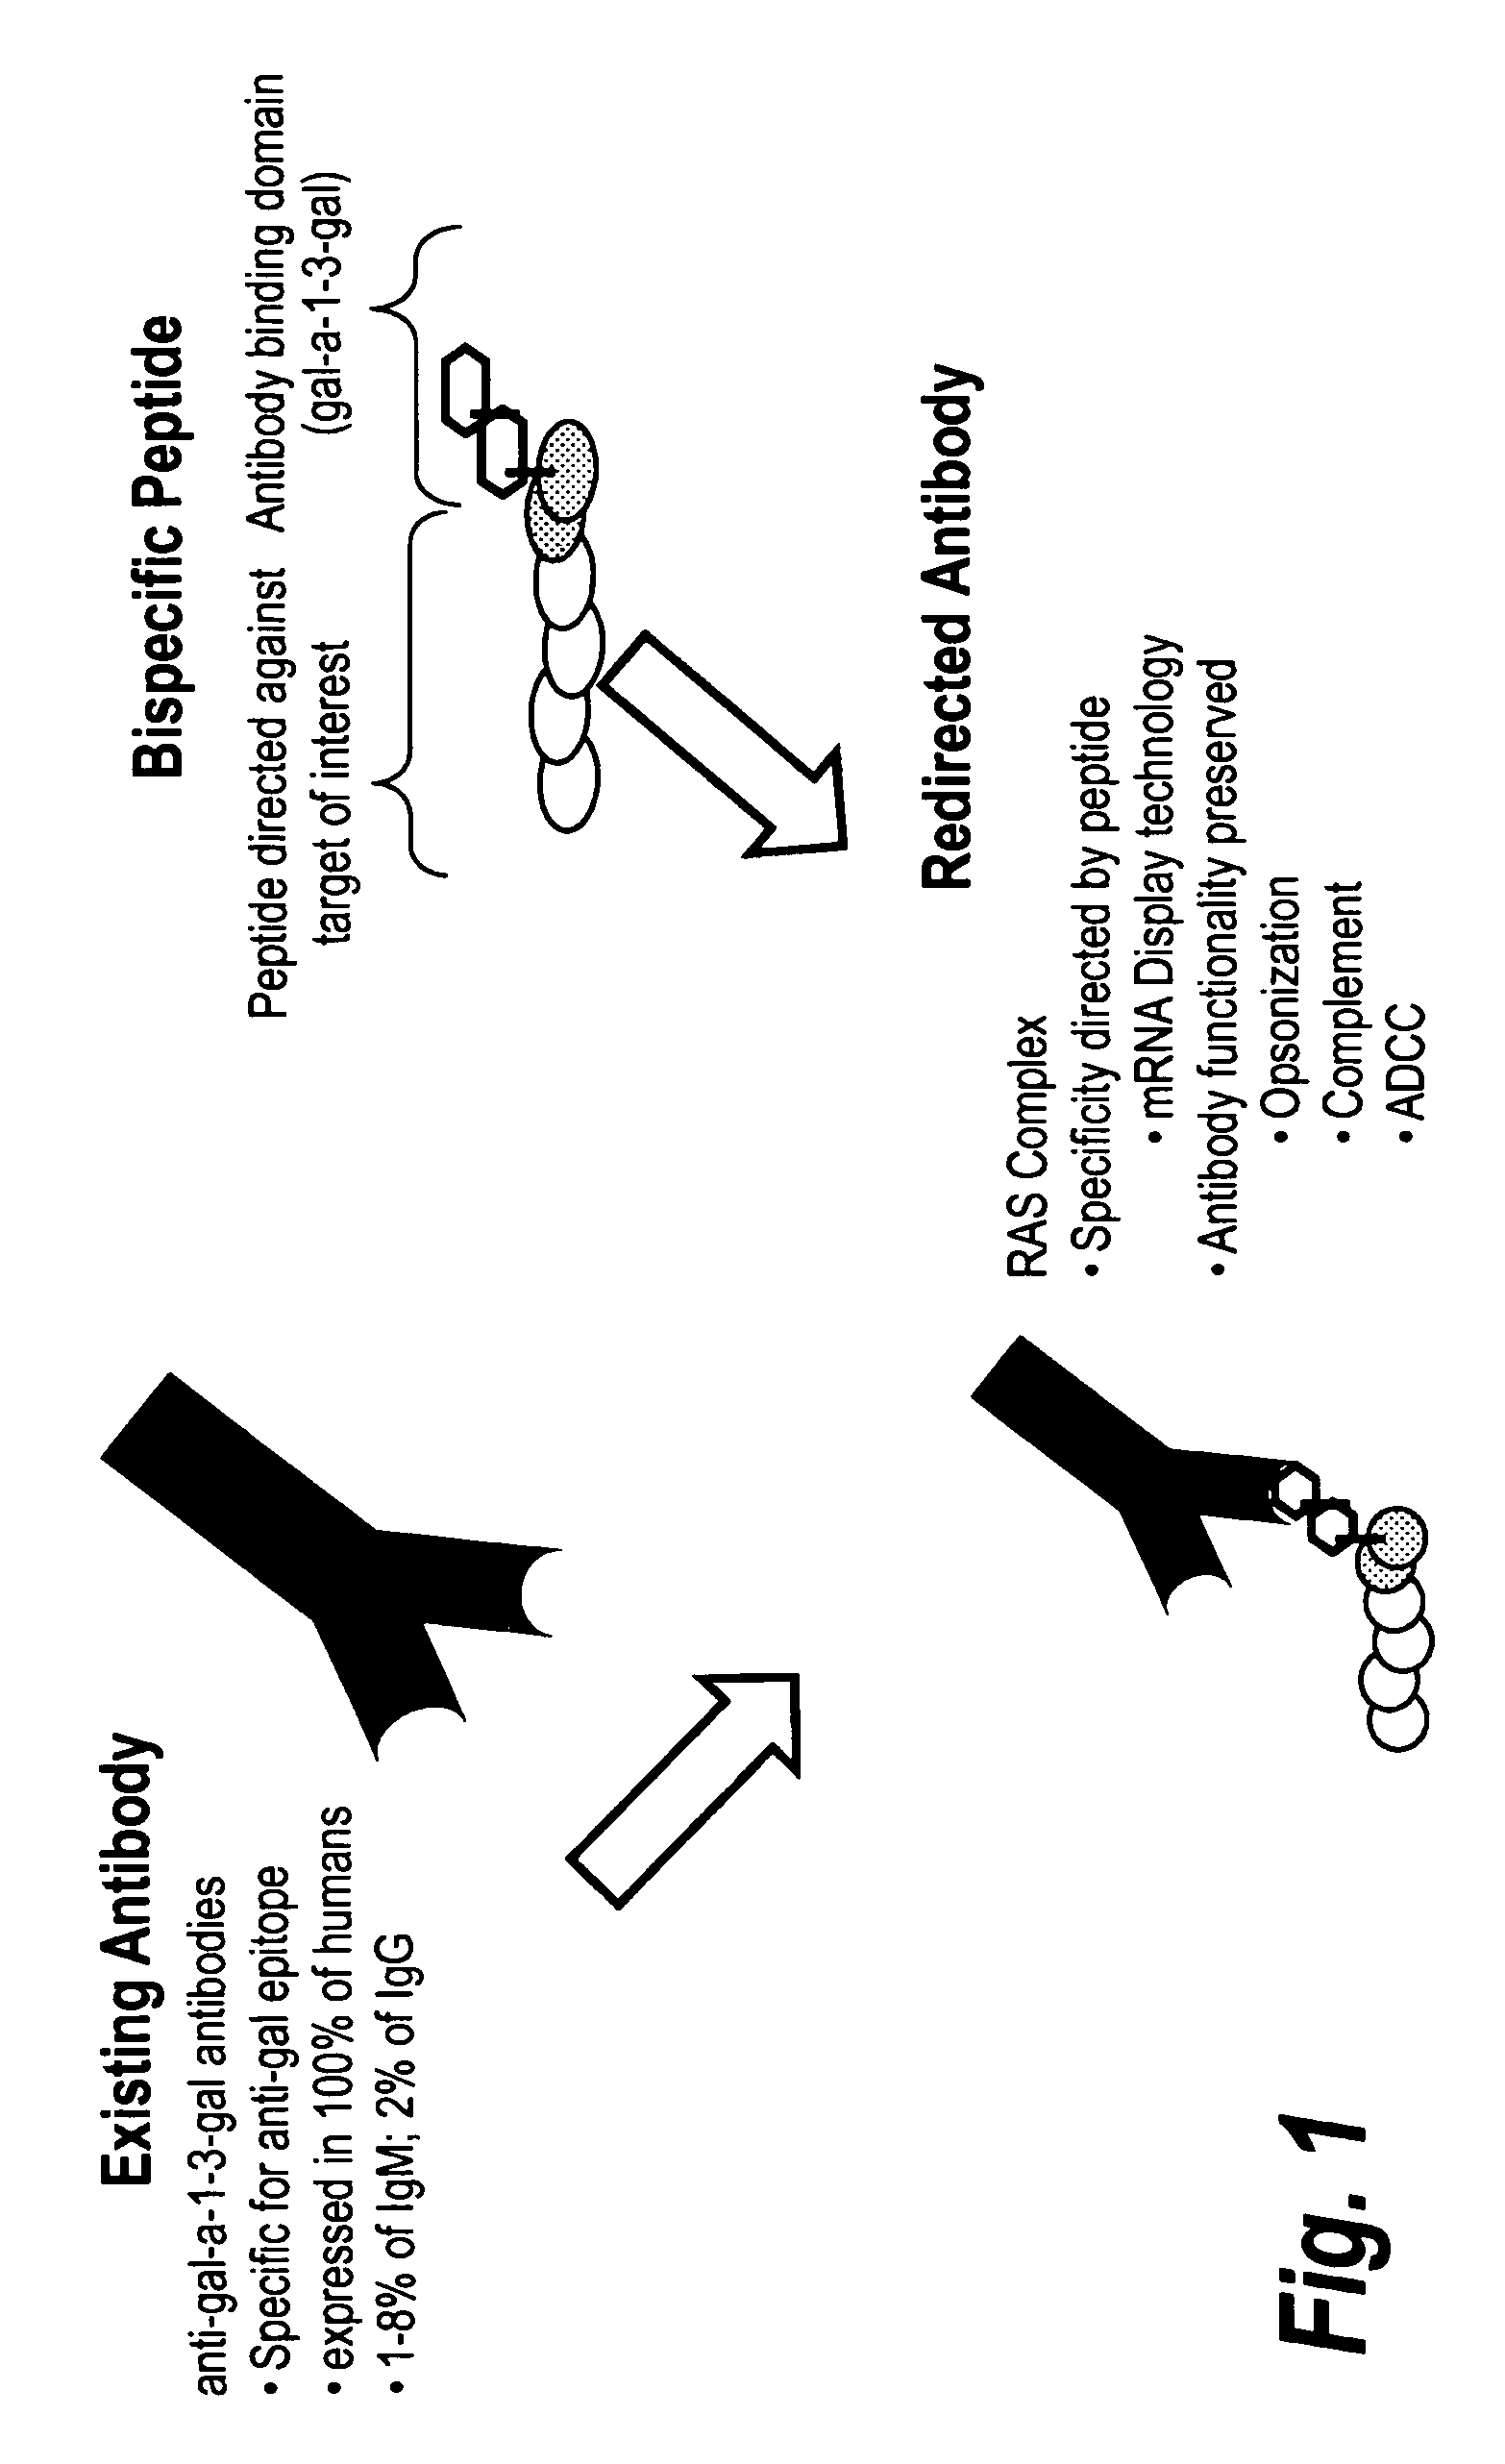 High affinity adaptor molecules for redirecting antibody specifity